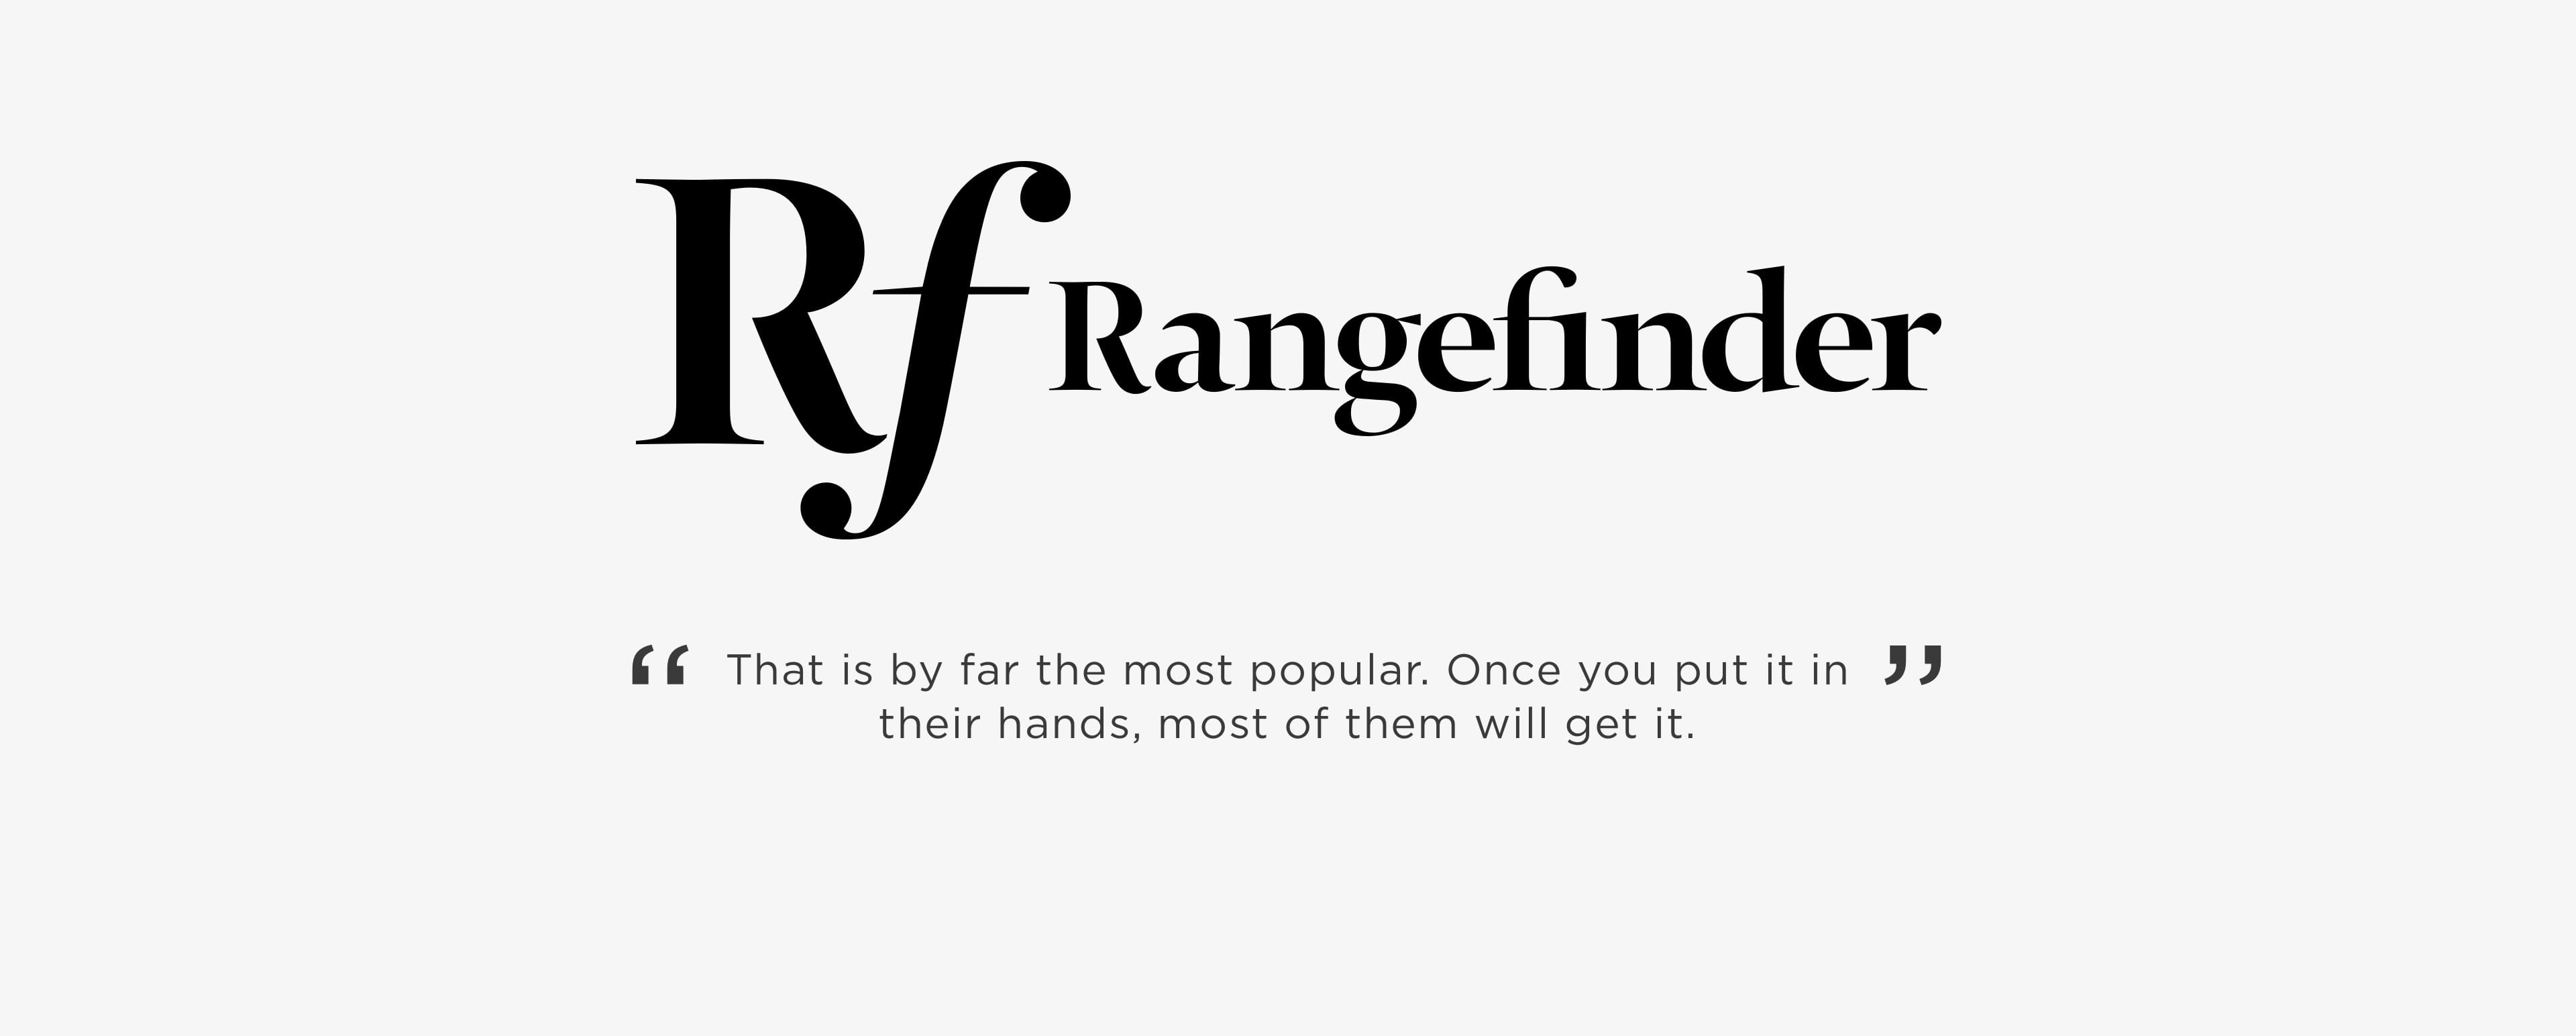 a graphic with the logo of rf rangefinder magazine and a quote from a review on zno image box album usb set